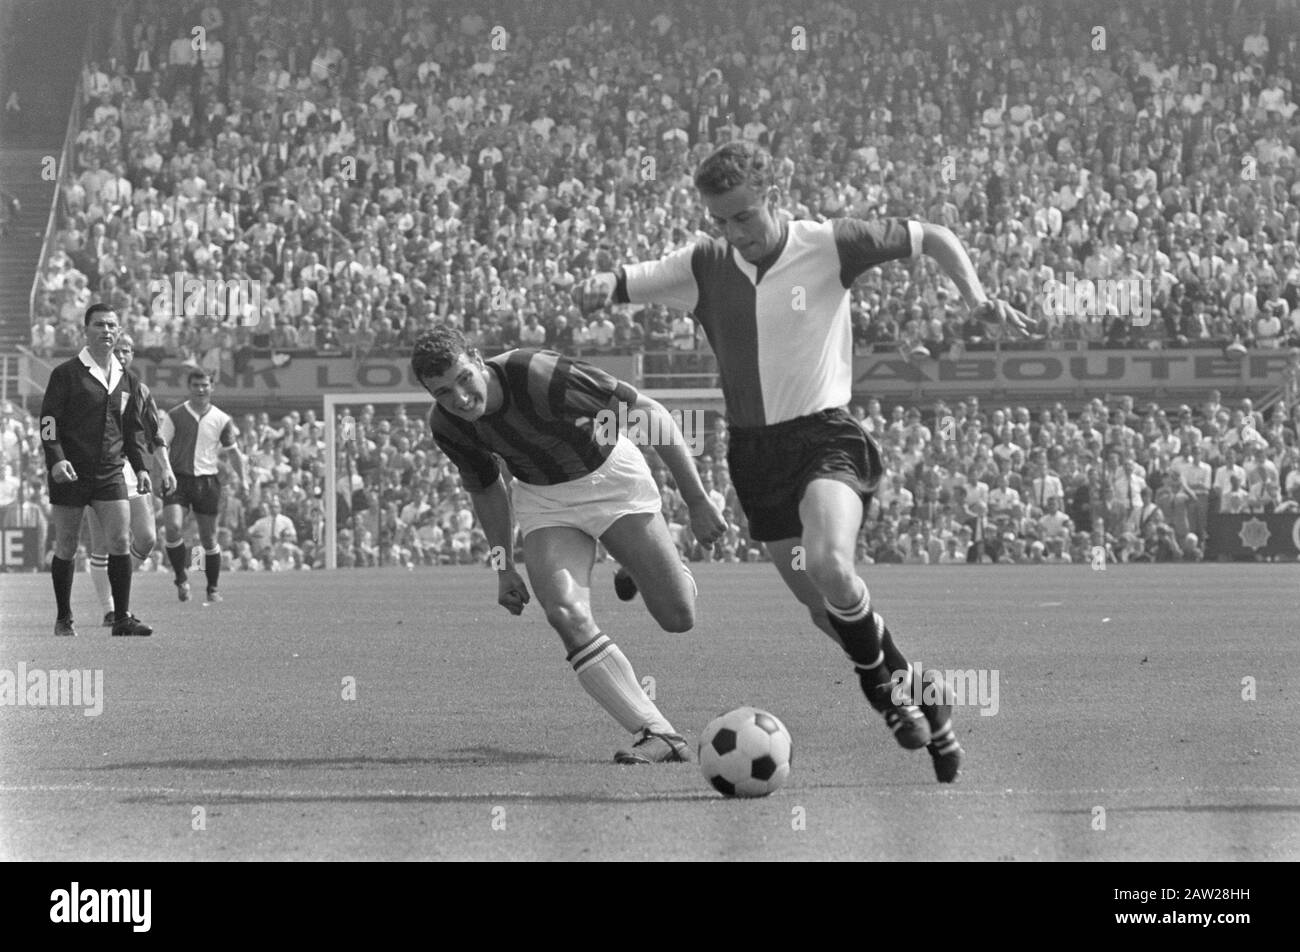 Feyenoord soccer against DWS  Kindvall (right Feyenoord) and crossing (DWS) in action Annotation: Border Song negative strip: No. 3 - Moulijn (right Feyenoord) and Flinkevleugel (DWS) date: August 25, 1968 Keywords: soccer, sports Person Name: Kindvall, Ove, crossing, Niels Institution Name: Feyenoord Stock Photo